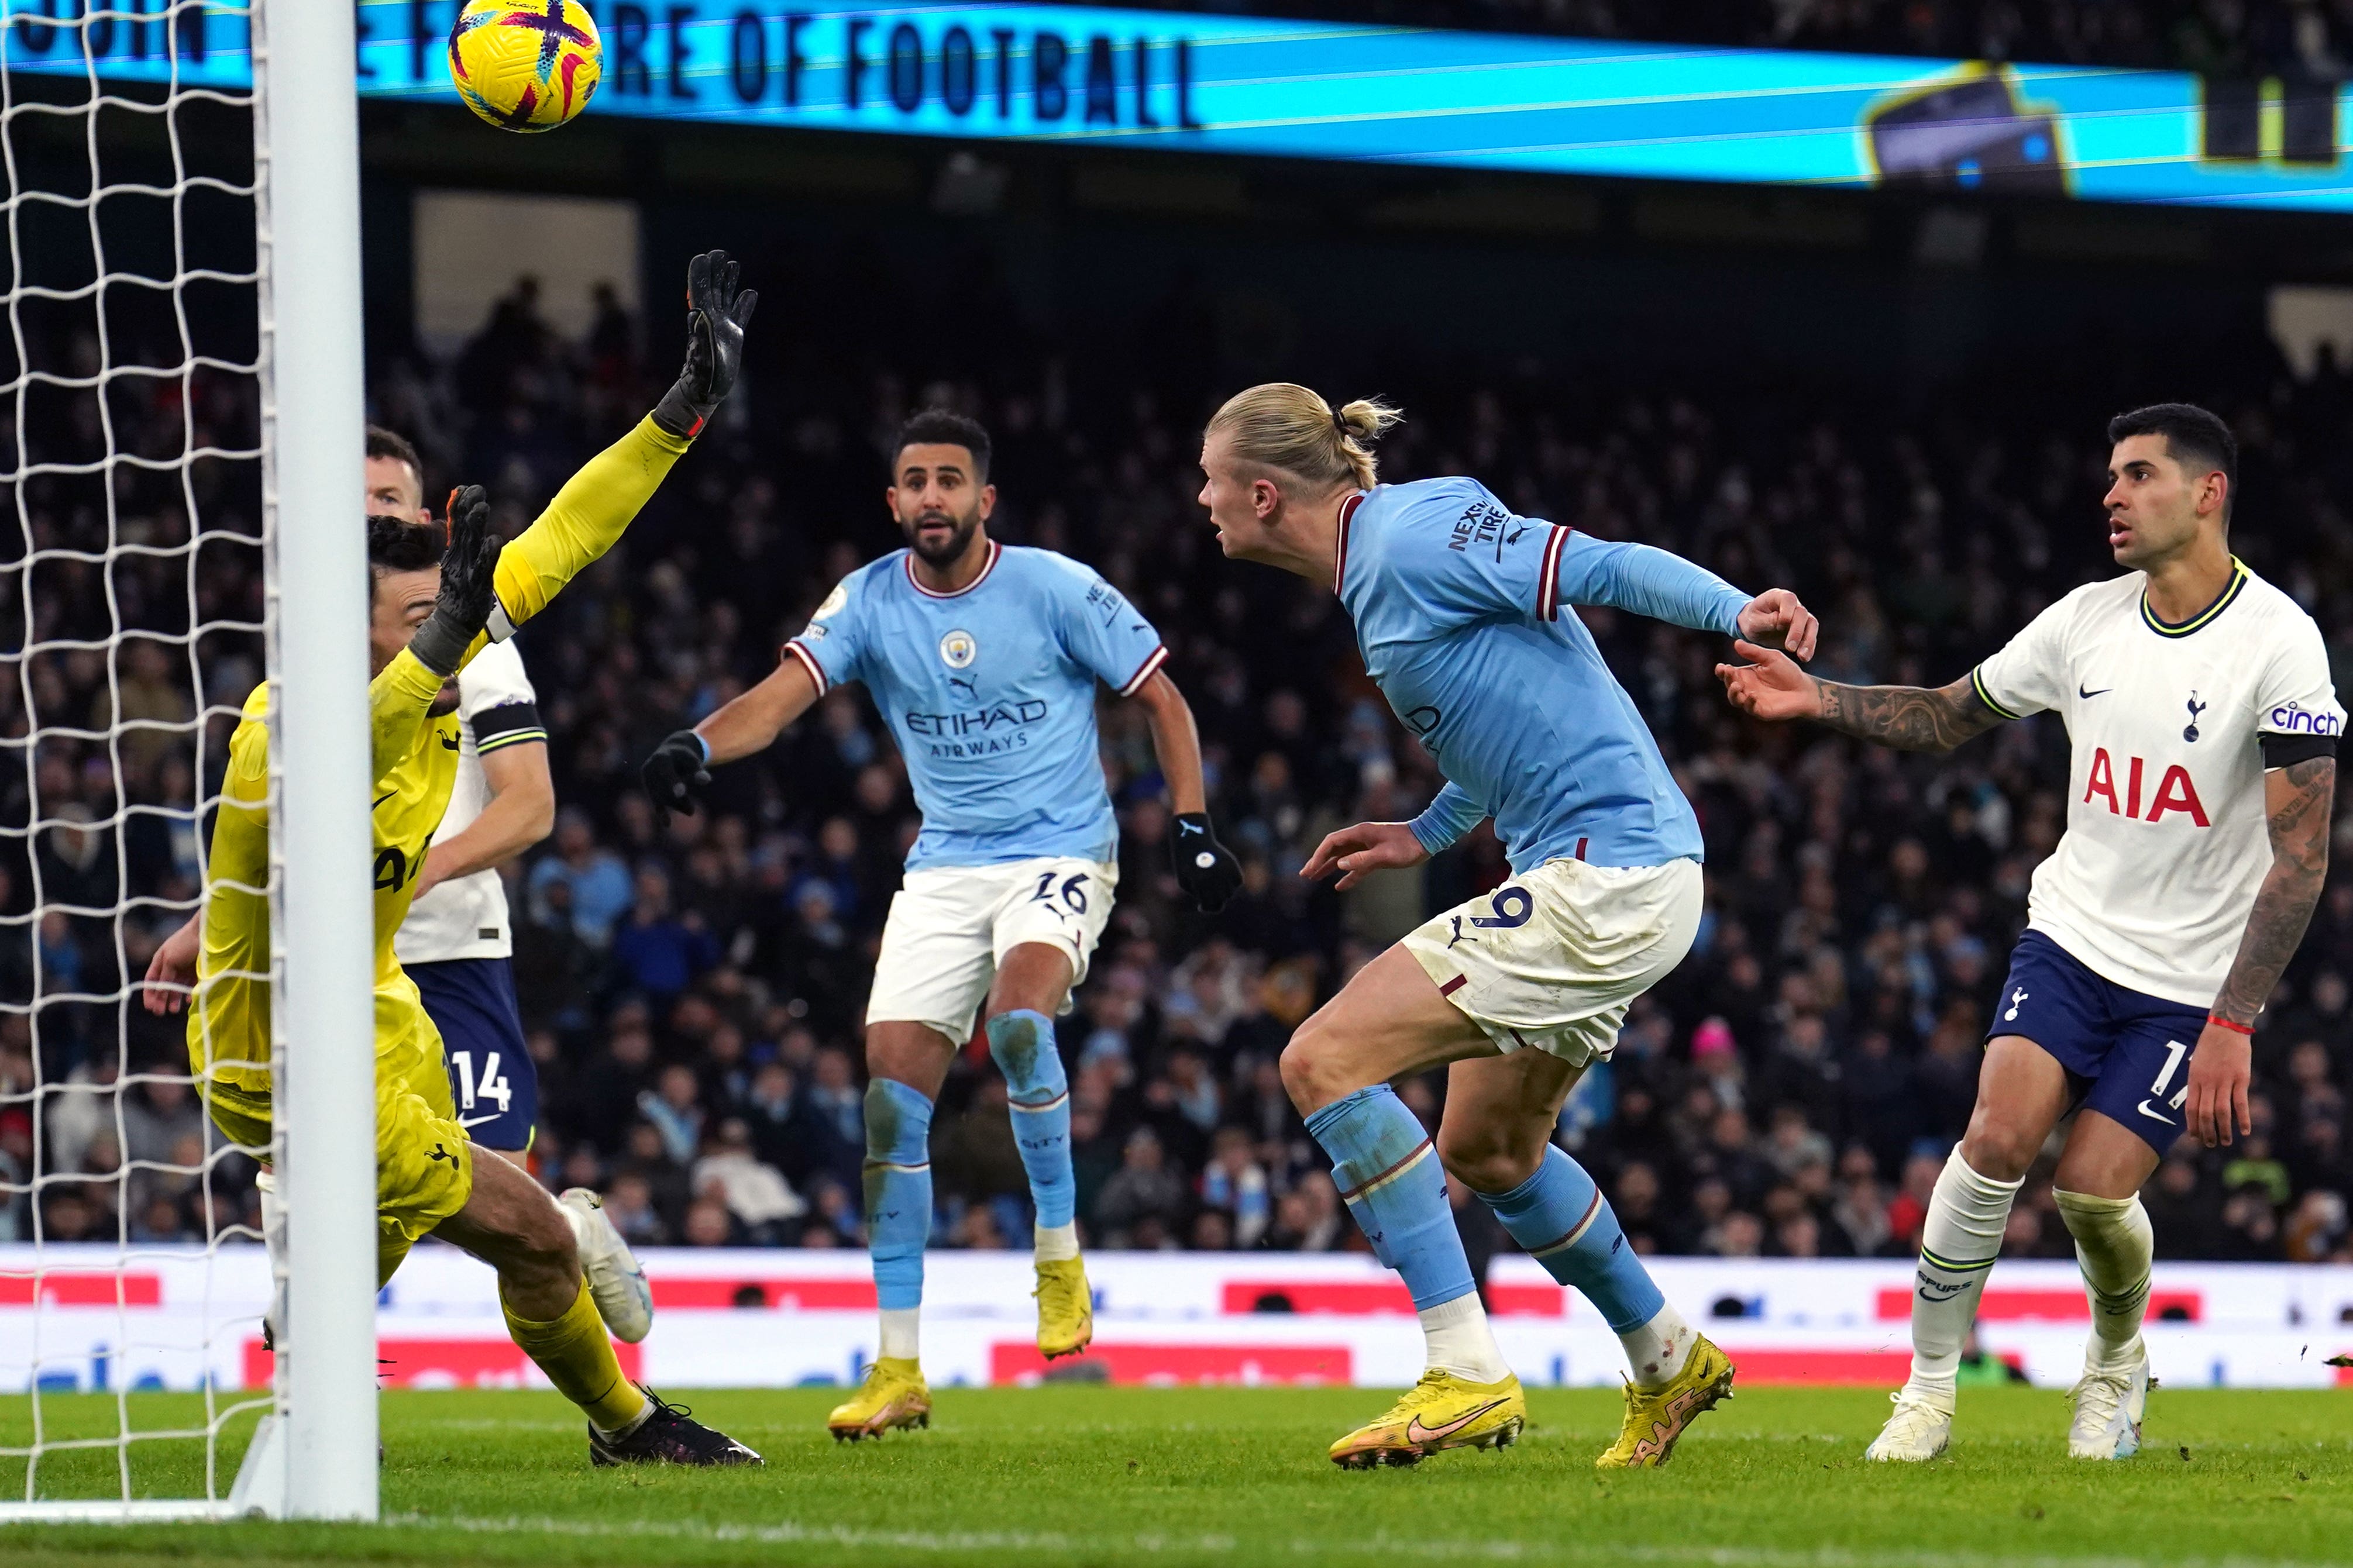 Tottenham conceded four goals in the second half to lose 4-2 at Manchester City (Martin Rickett/PA)